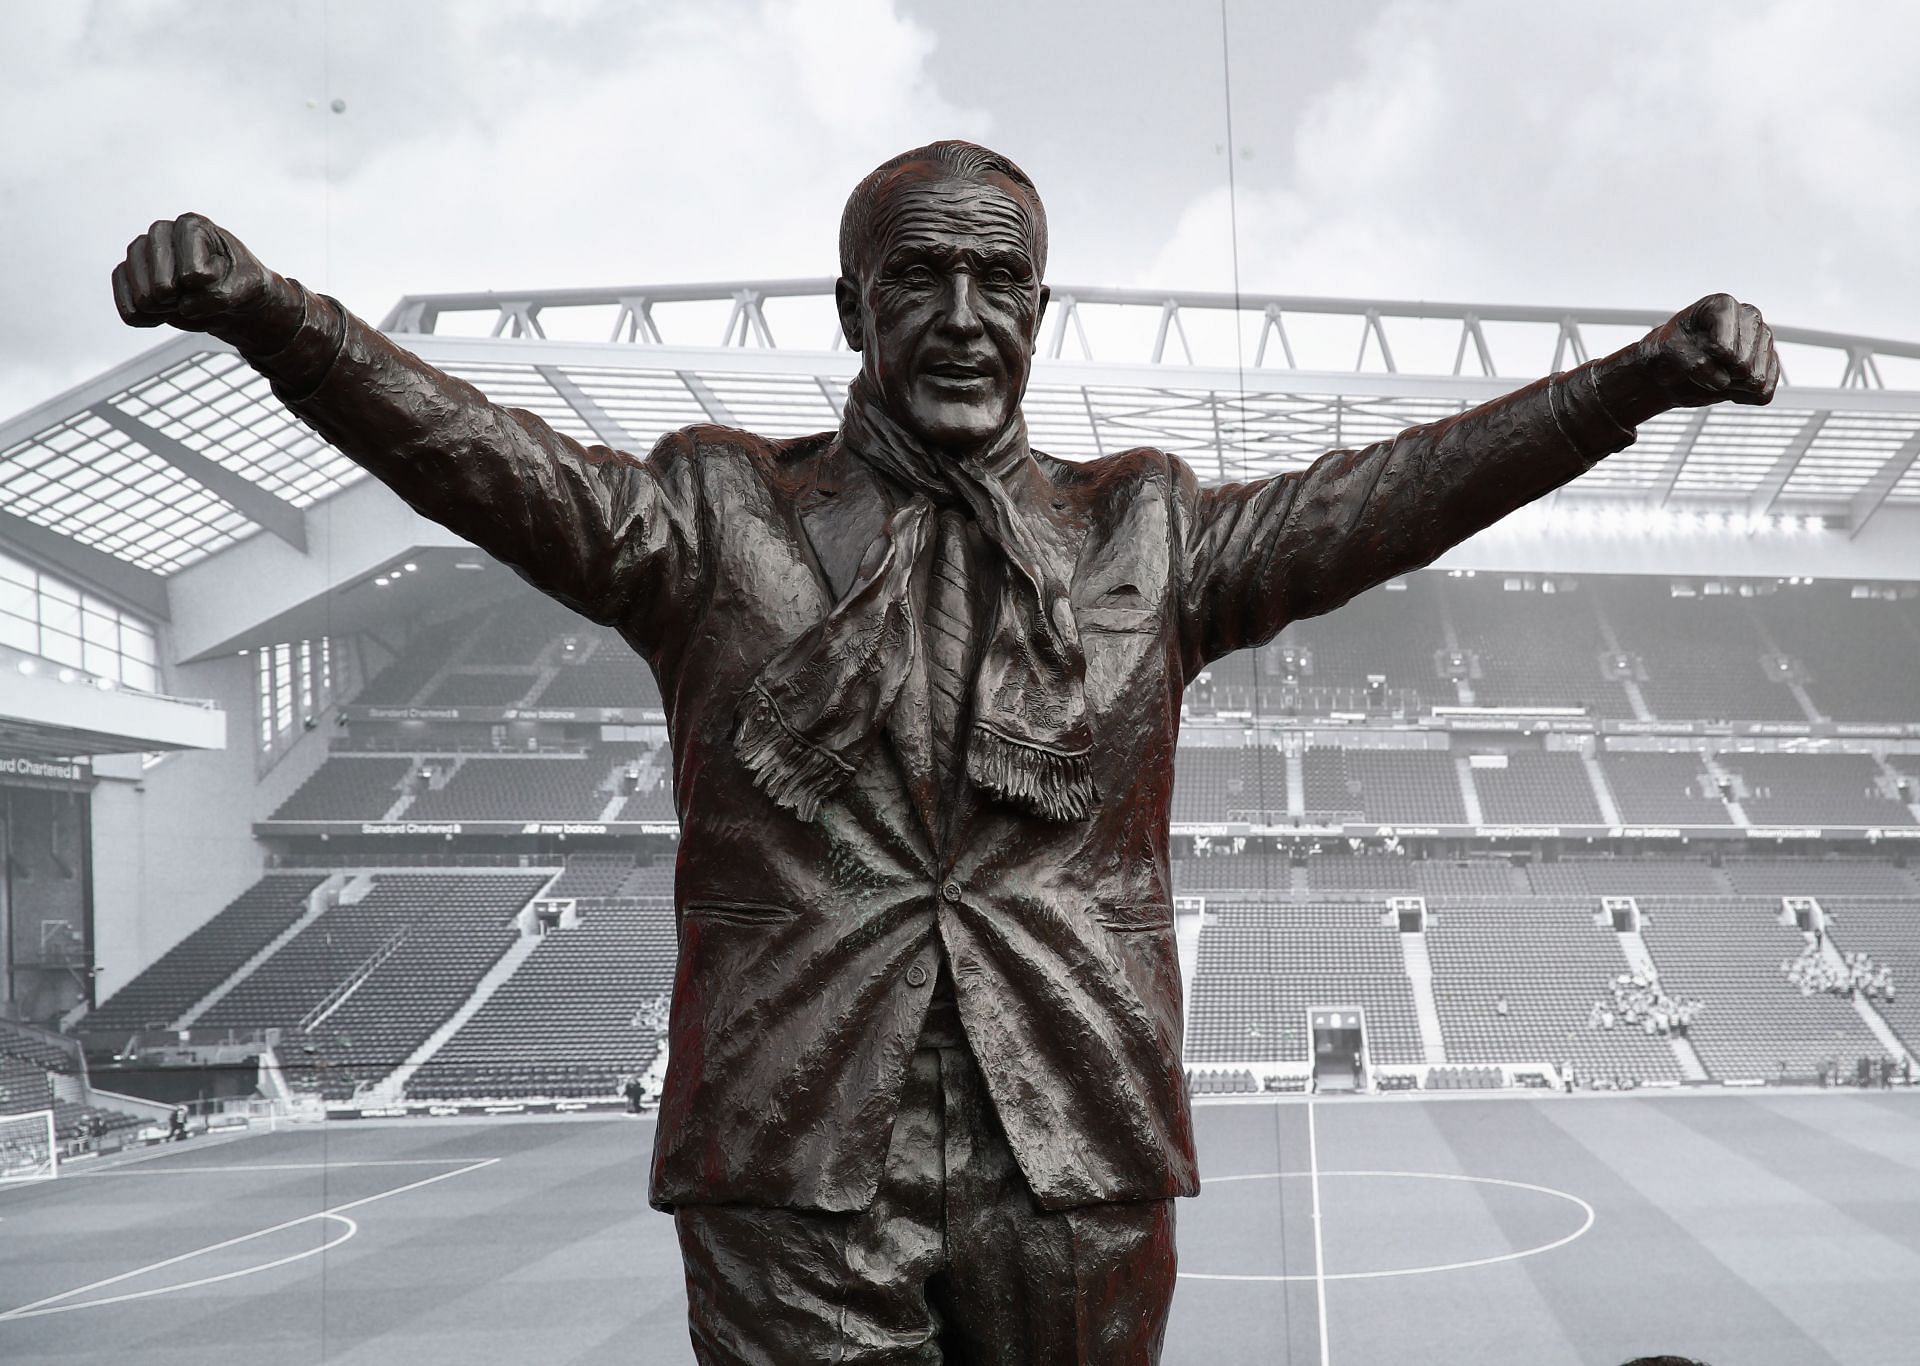 Liverpool FC honoured the legendary Bill Shankly with a statue outside Anfield.